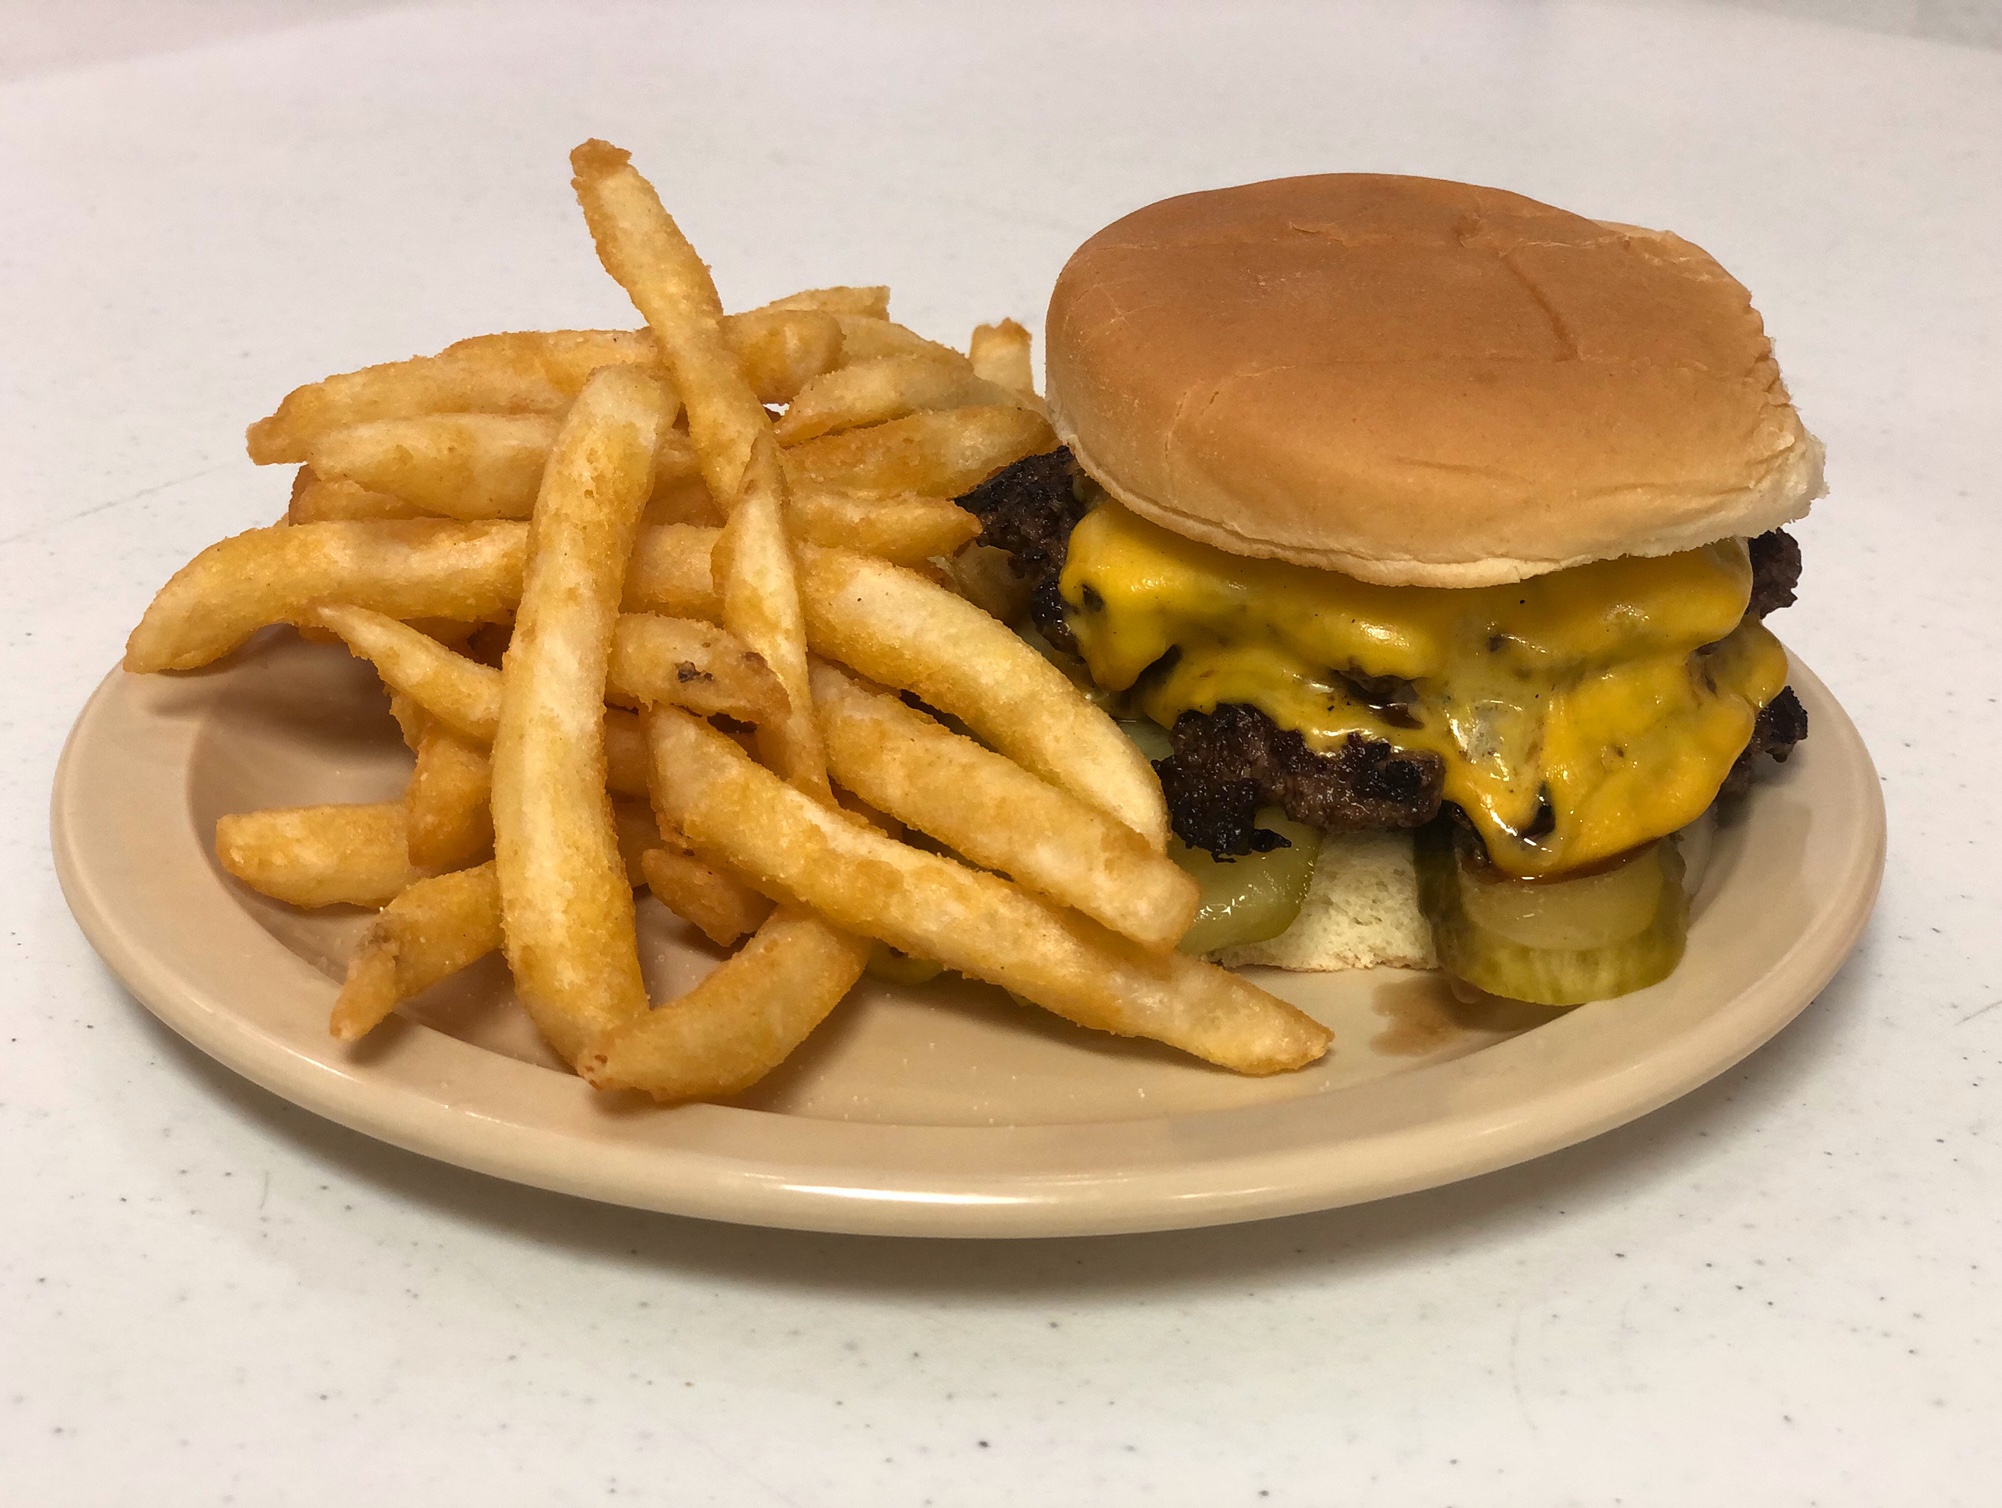 On a light brown plate, there is a cheeseburger with pickles sticking out and a side of fries. Photo by Alyssa Buckley.